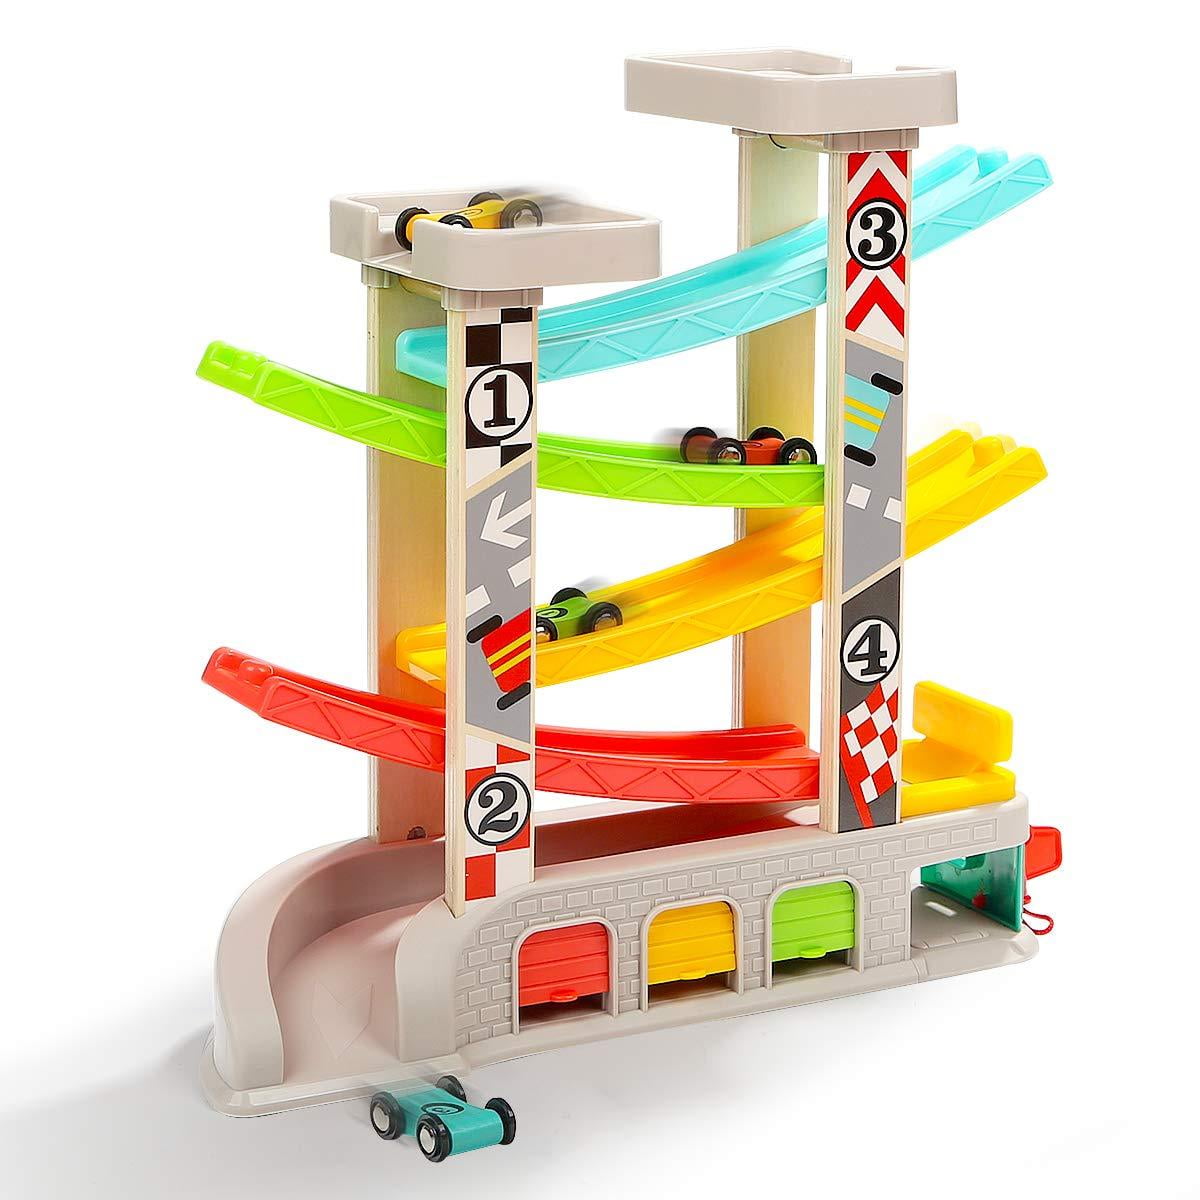 Top Bright Toddler Wooden Toys for 1 2 Year Old Boy Gifts Car Ramp Racer Tower 